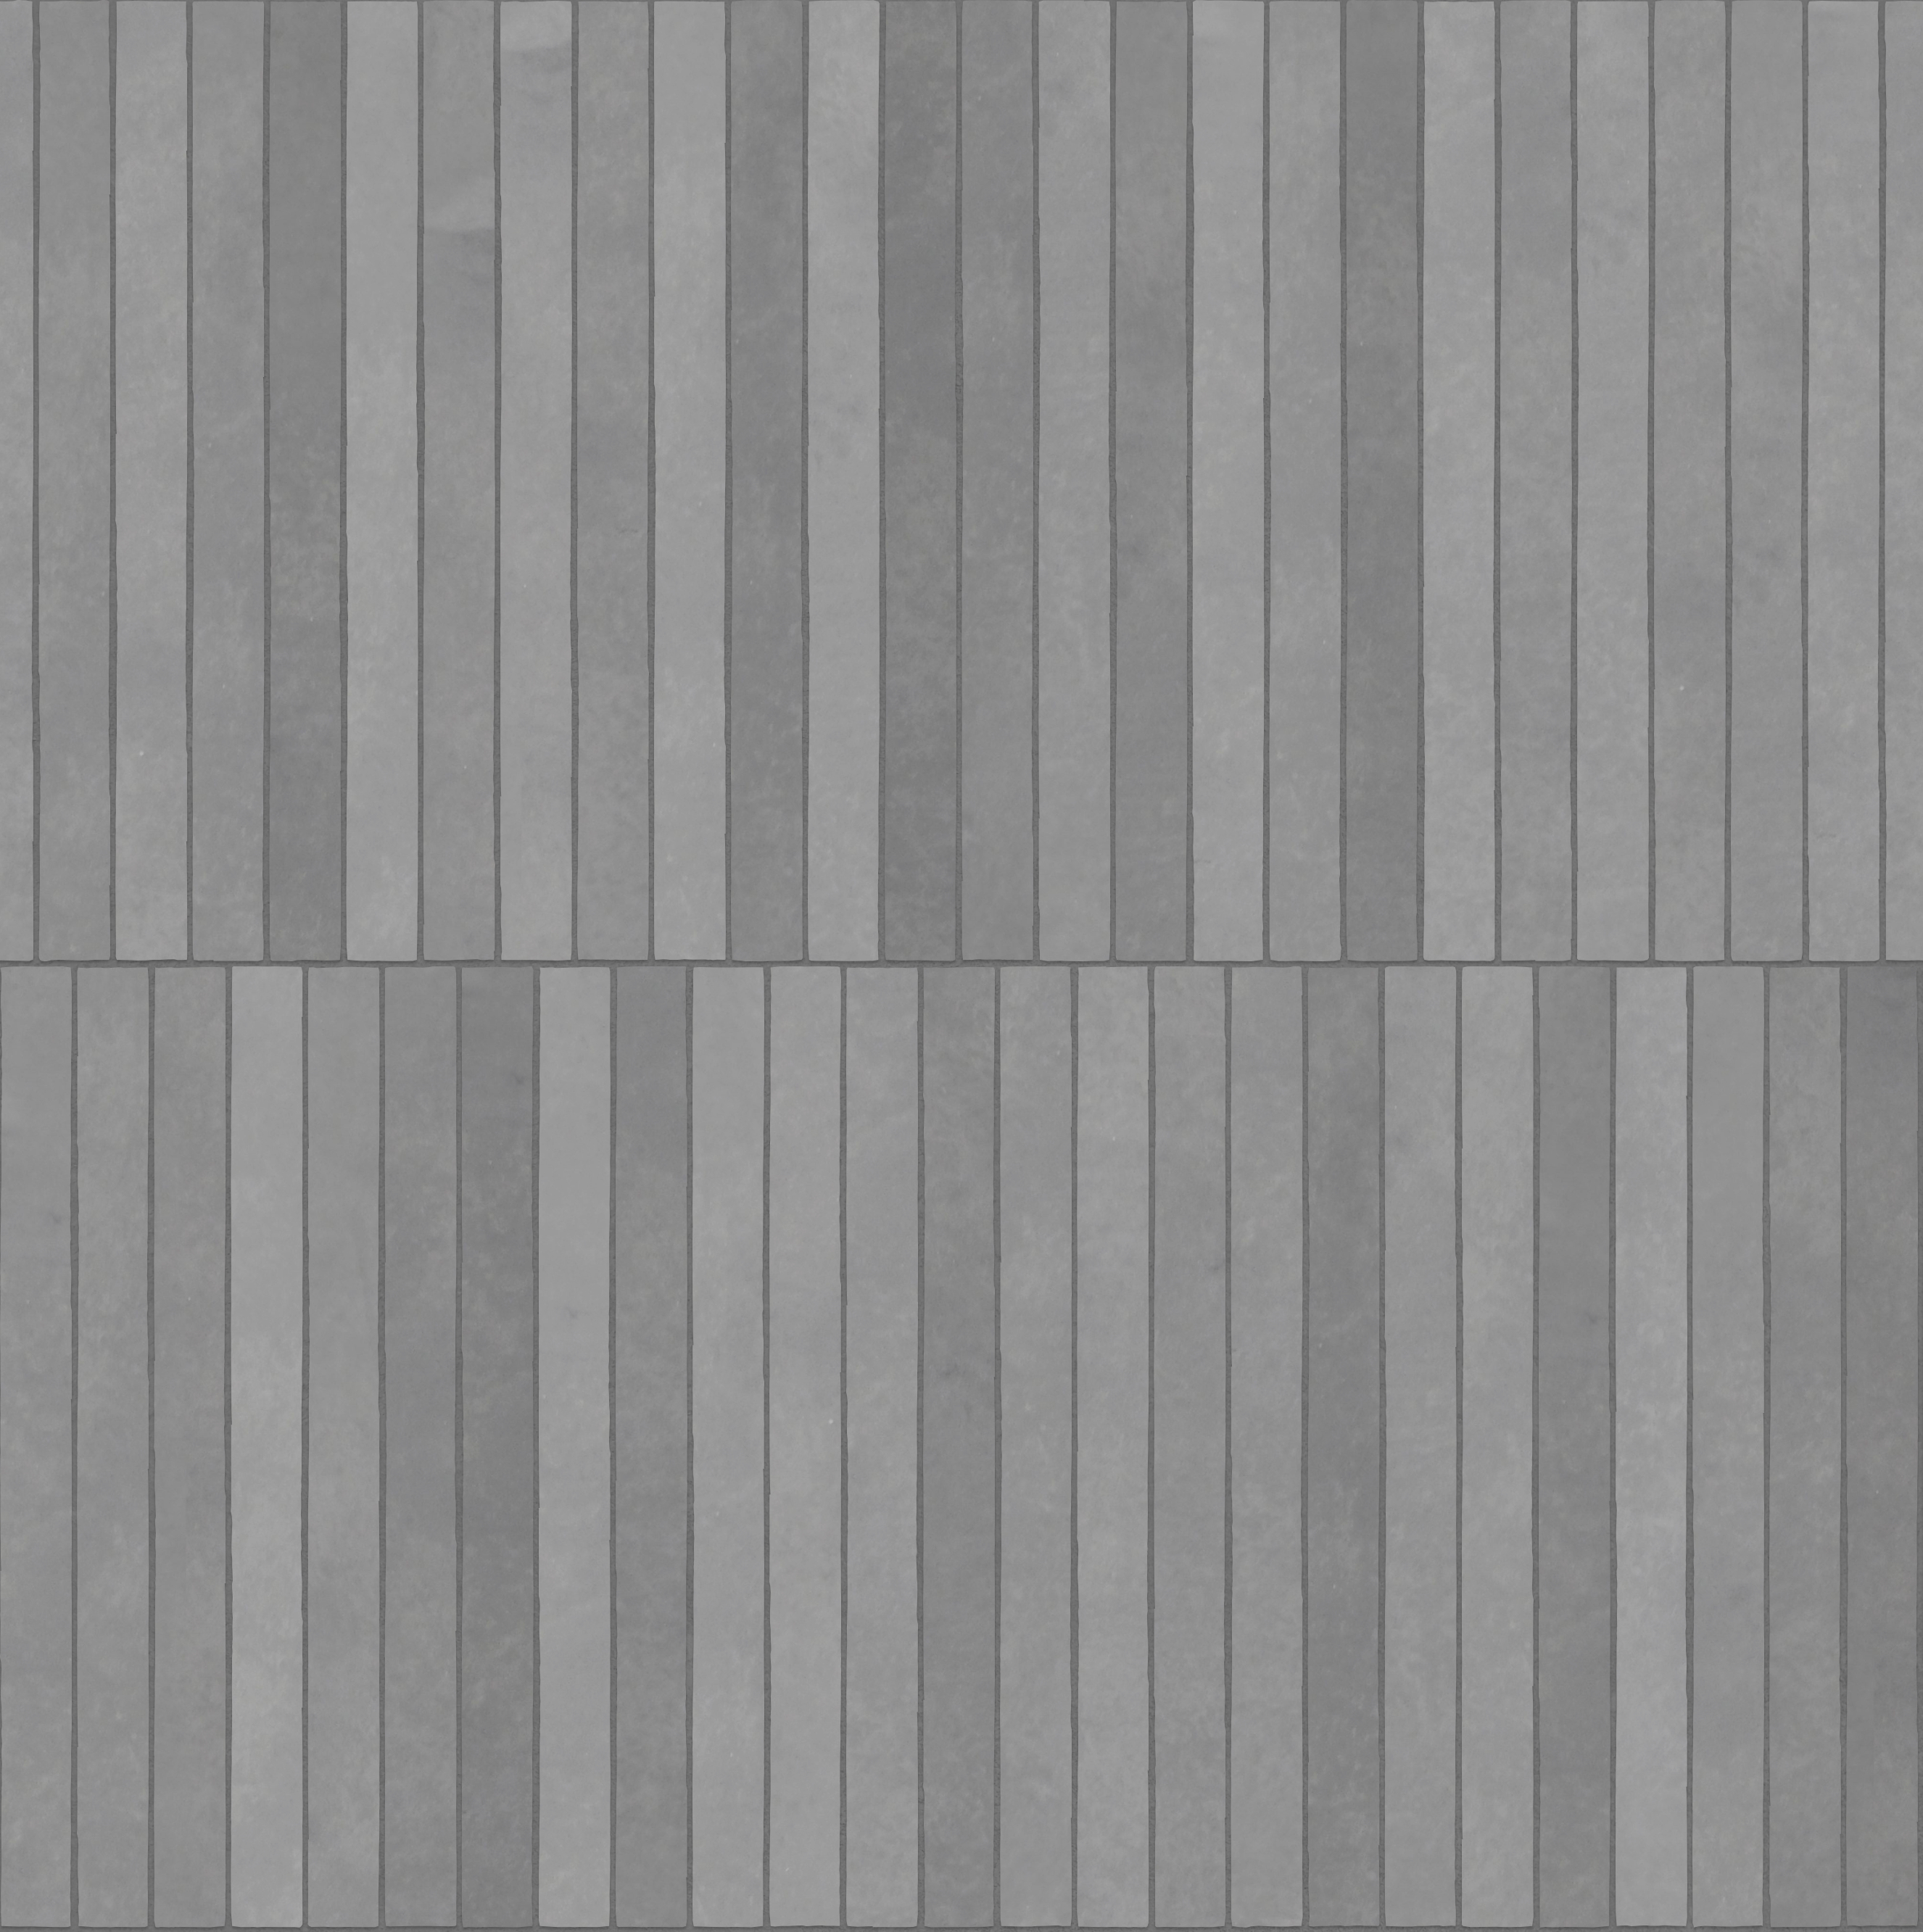 A seamless concrete texture with polished concrete blocks arranged in a Stretcher pattern